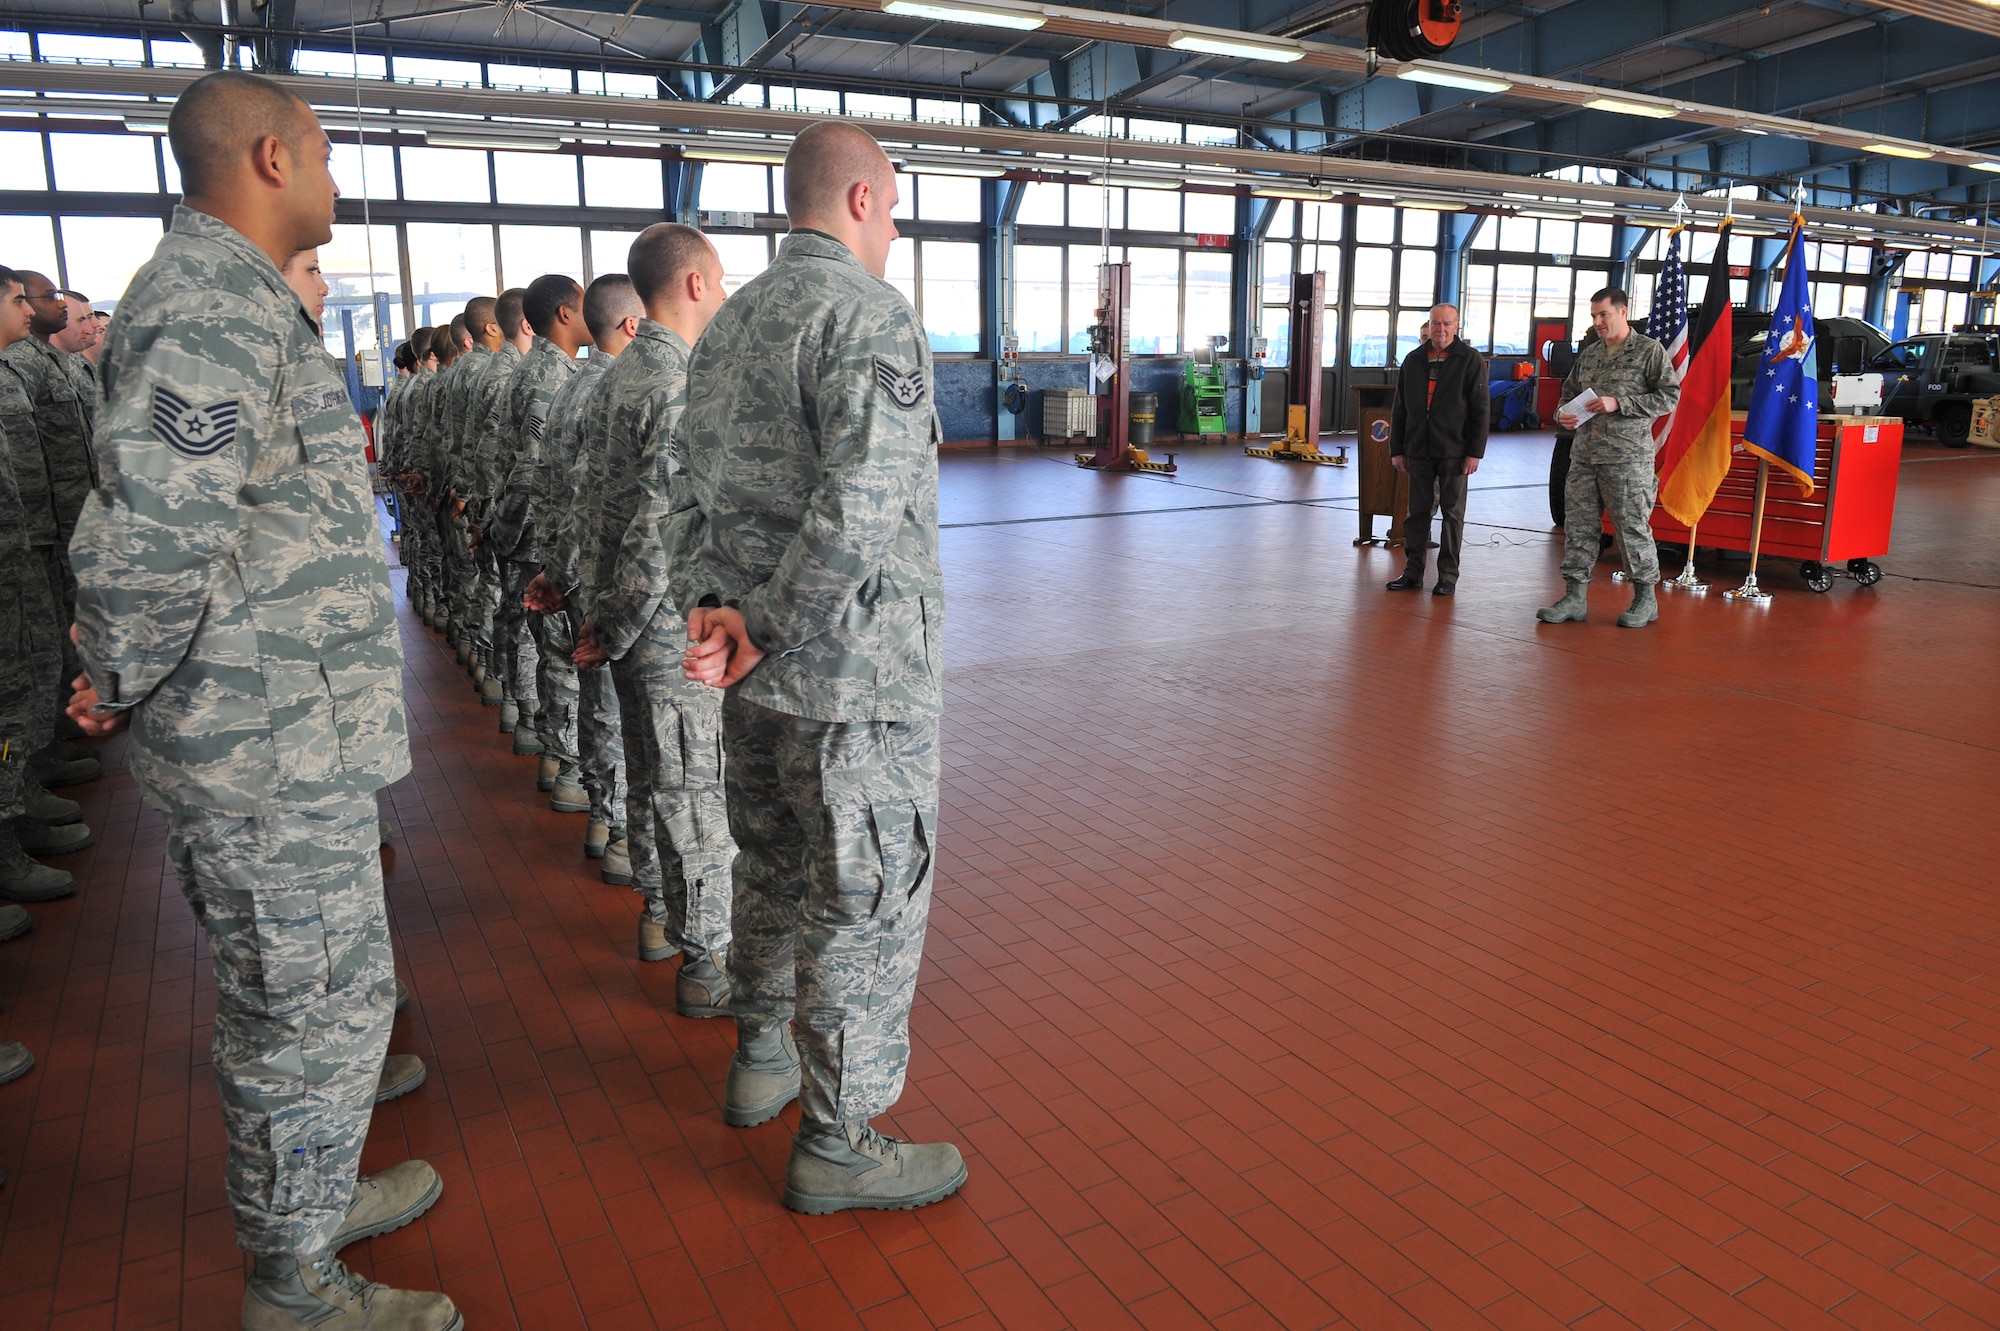 SPANGDAHLEM AIR BASE, Germany – Airmen from the 52nd Logistics Readiness Squadron stand in formation during a civilian length of service ceremony inside Bldg. 110 here March 9. The ceremony honored Mr. Hans Schinhofer, 52nd LRS lead vehicle operator, for his 35 years of service to Spangdahlem AB. Distinguished visitor Chief Master Sgt. Billy Davis, vehicle operations career field manager, took time to participate in the ceremony, as well as to discuss upcoming changes in the career field and answer questions. (U.S. Air Force photo by Airman 1st Class Dillon Davis/Released)